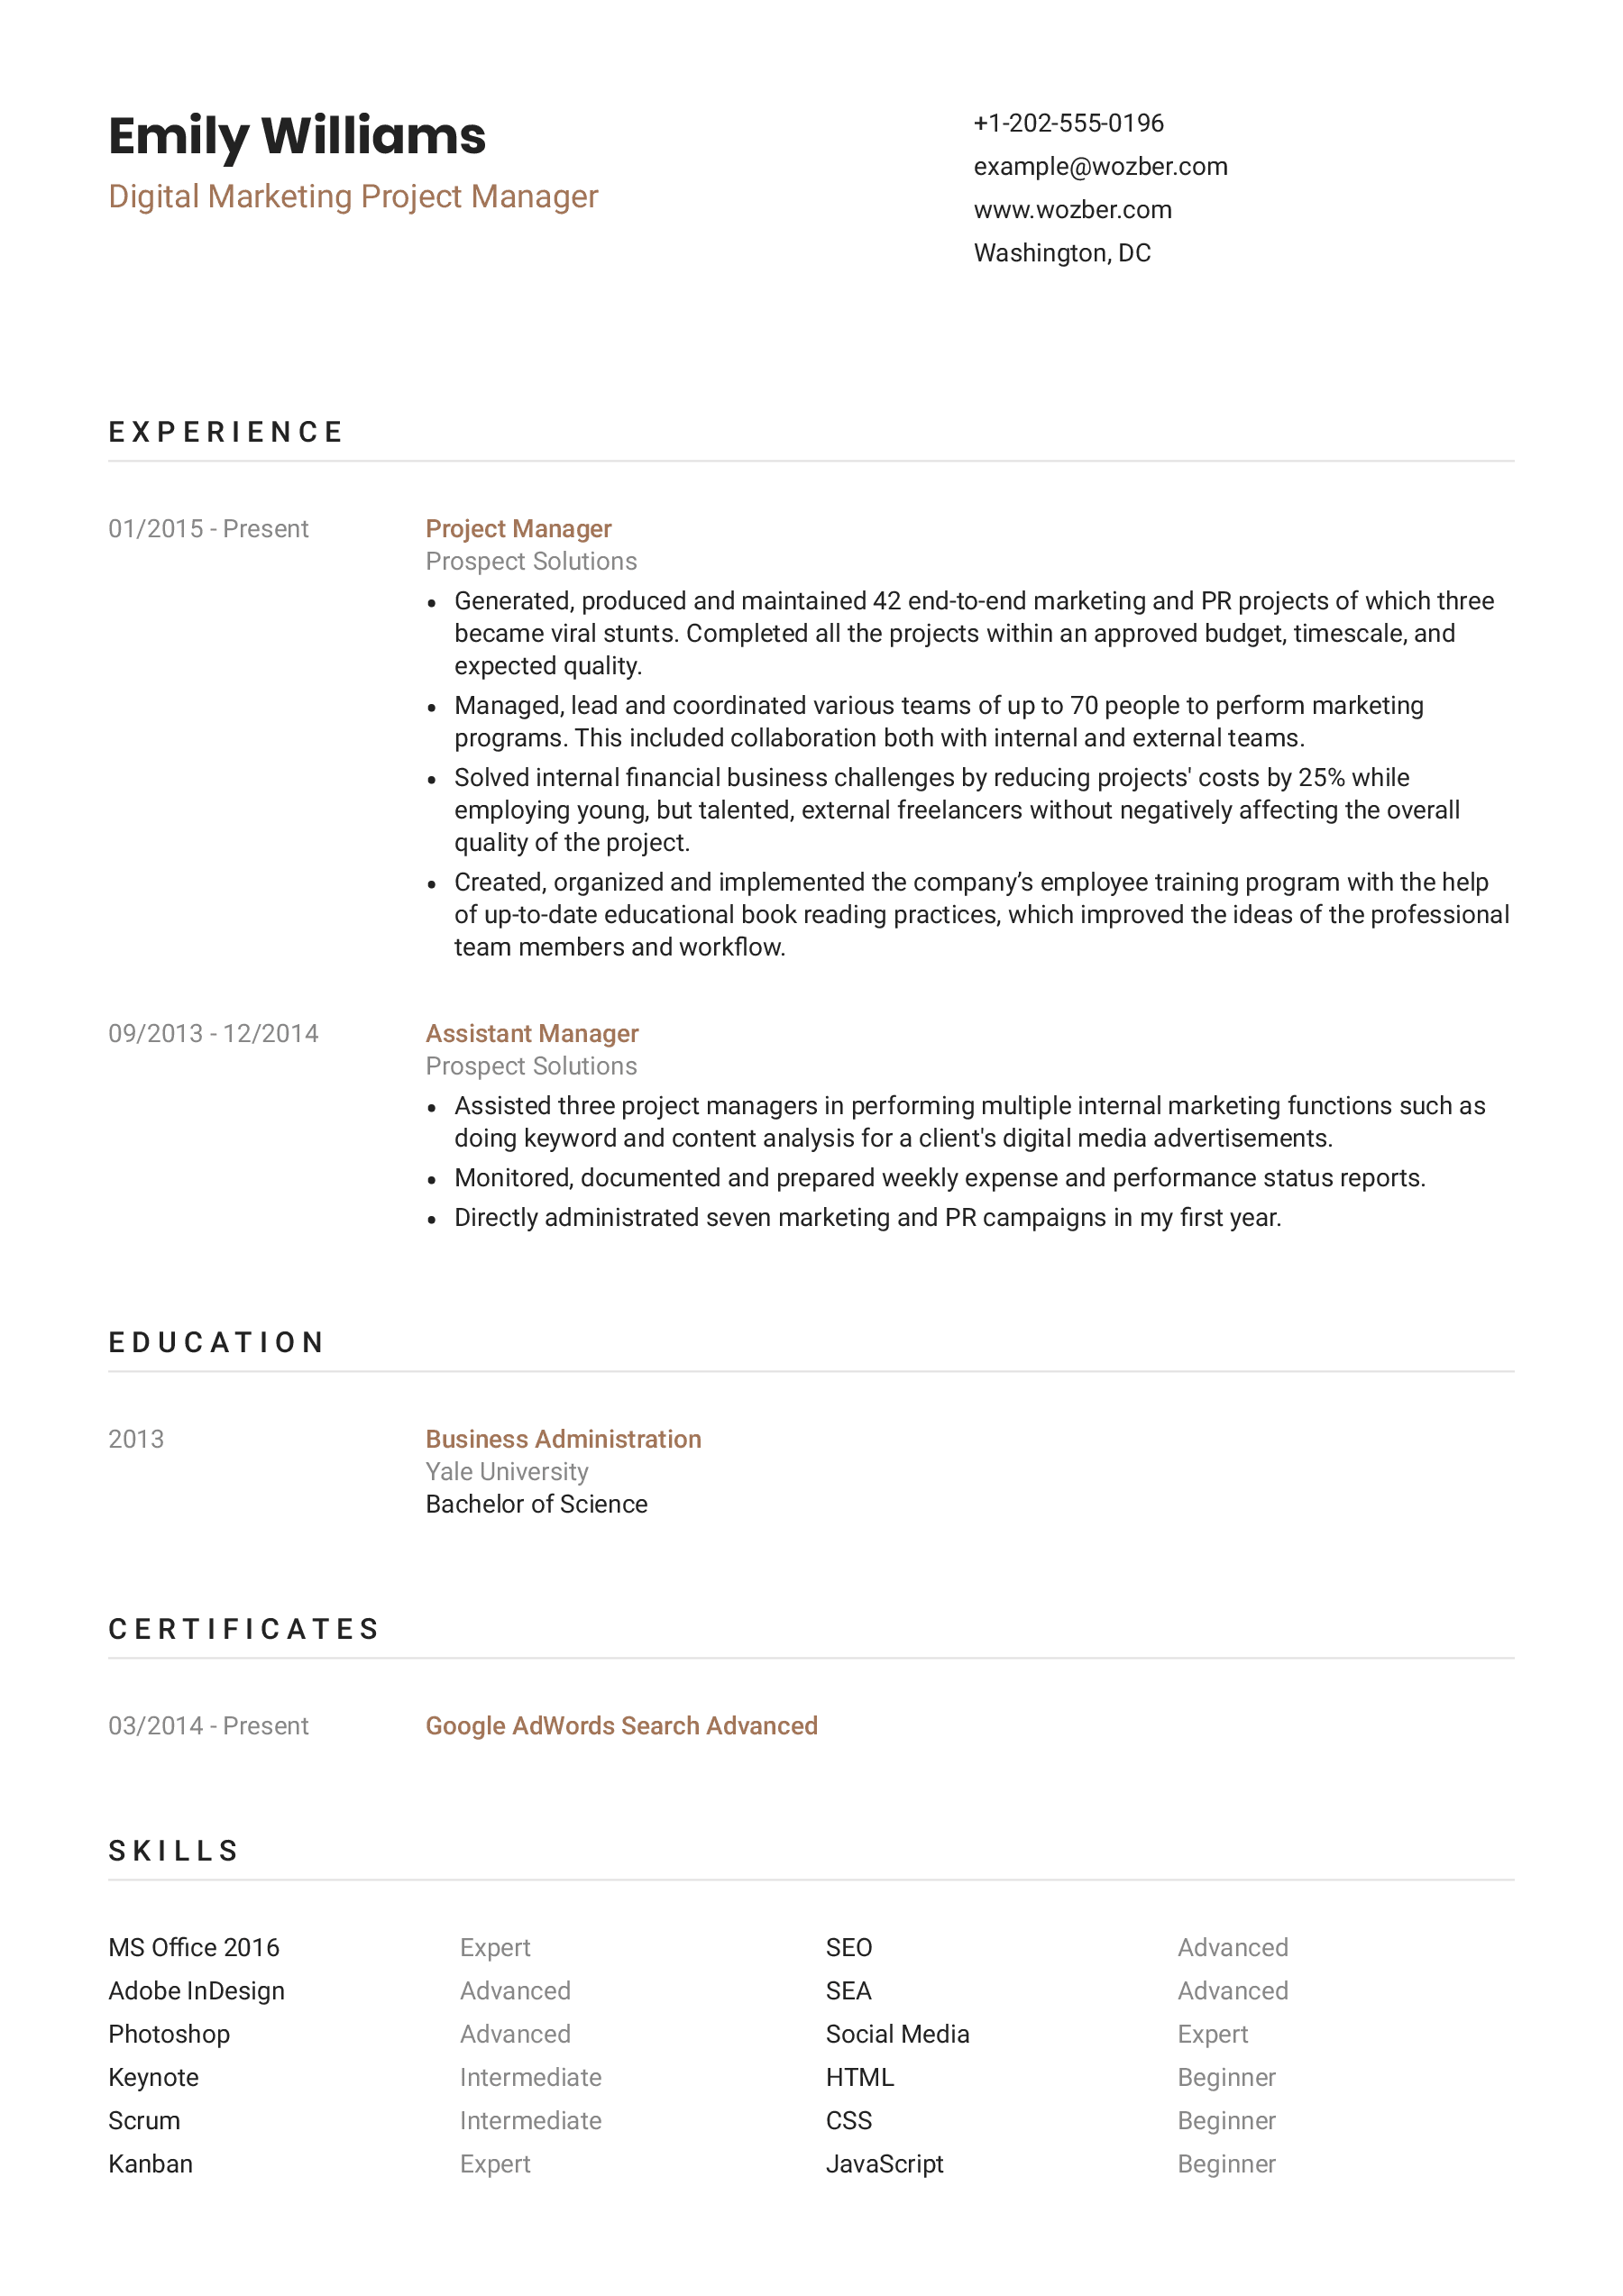 An ATS-friendly resume template with a classic, clean design.